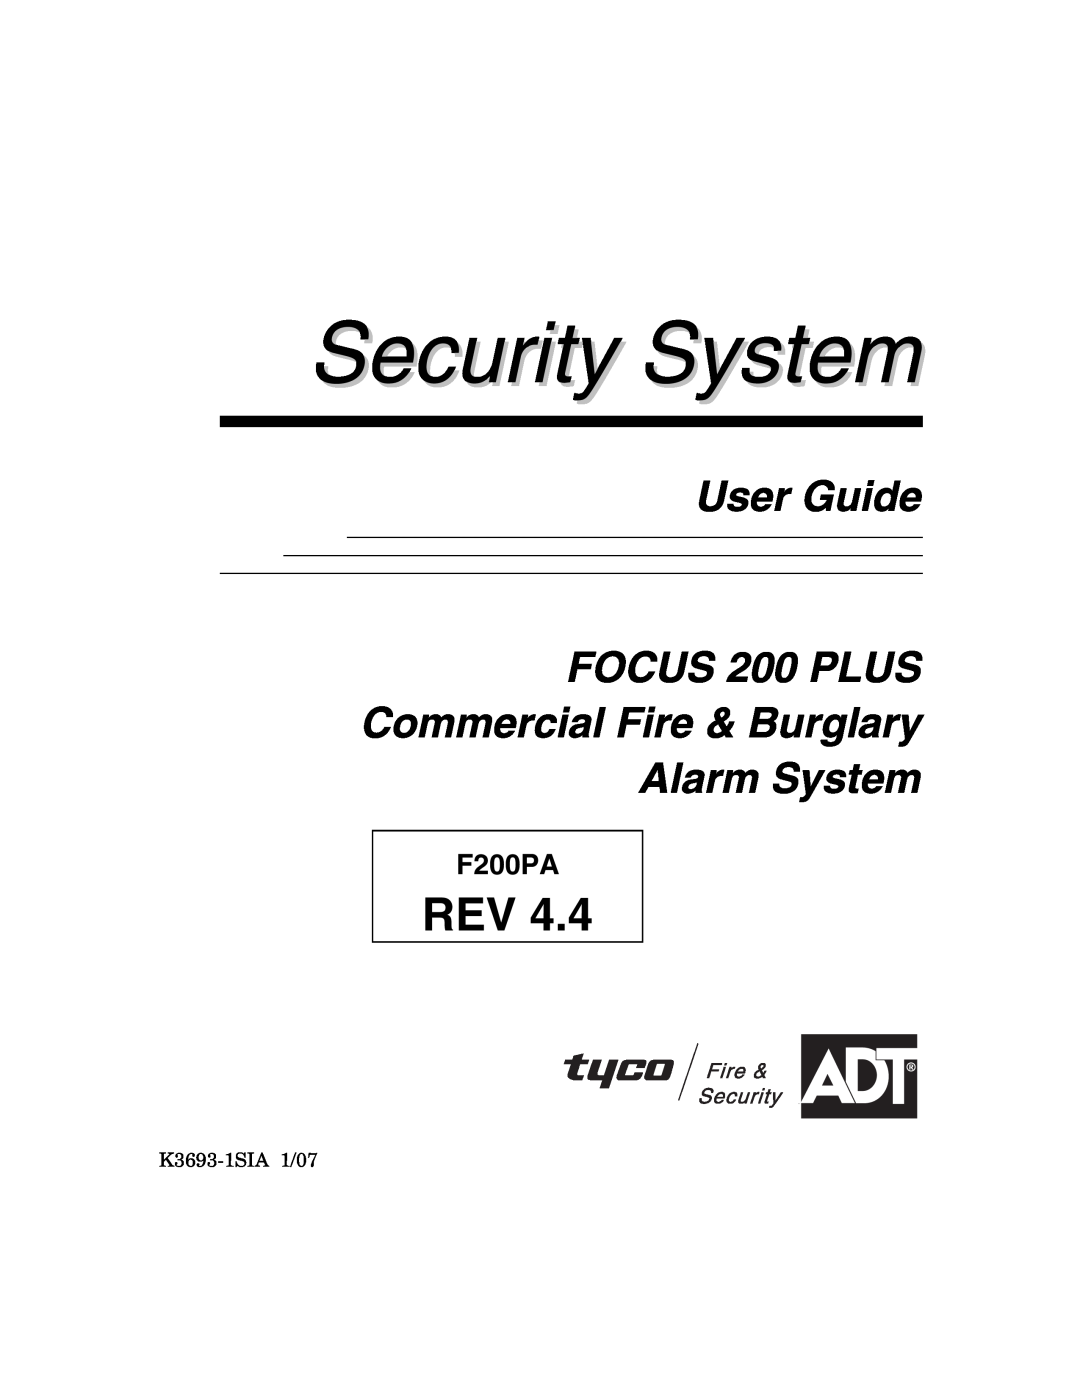 ADT Security Services 200 Plus manual Security System, User Guide FOCUS 200 PLUS, Commercial Fire & Burglary Alarm System 